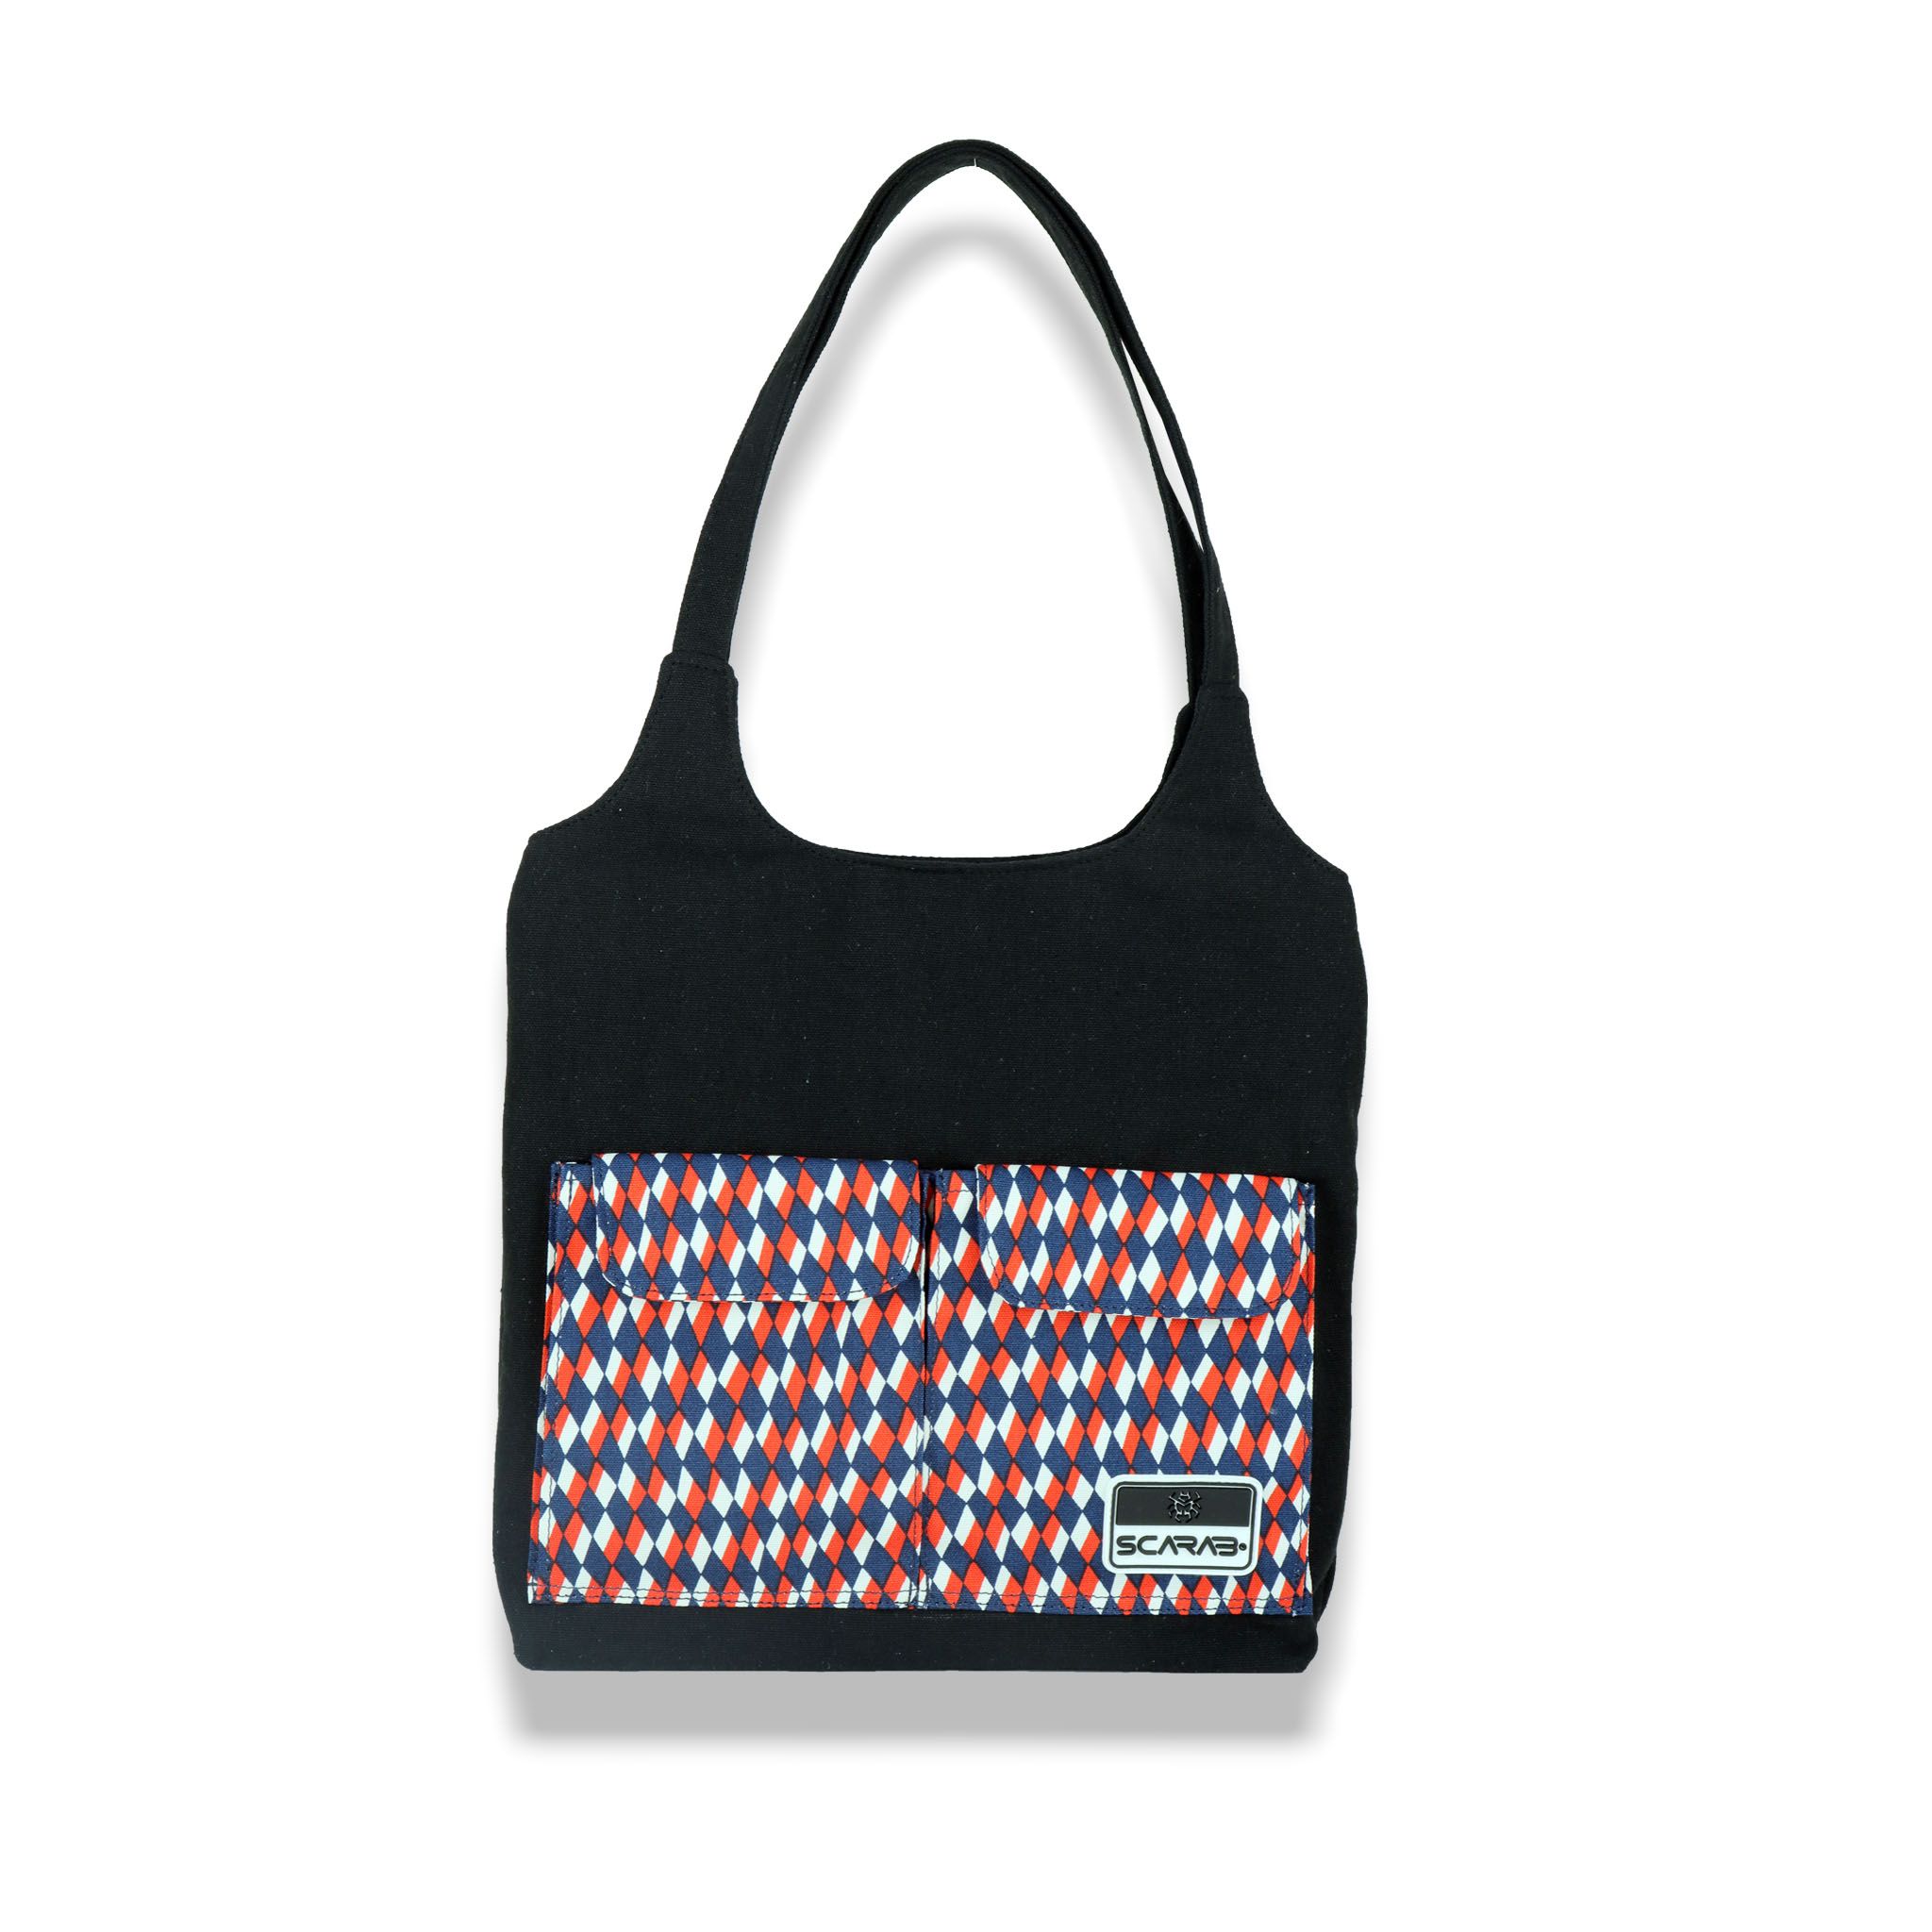  CARRY TOTE BAG - PATTERN 